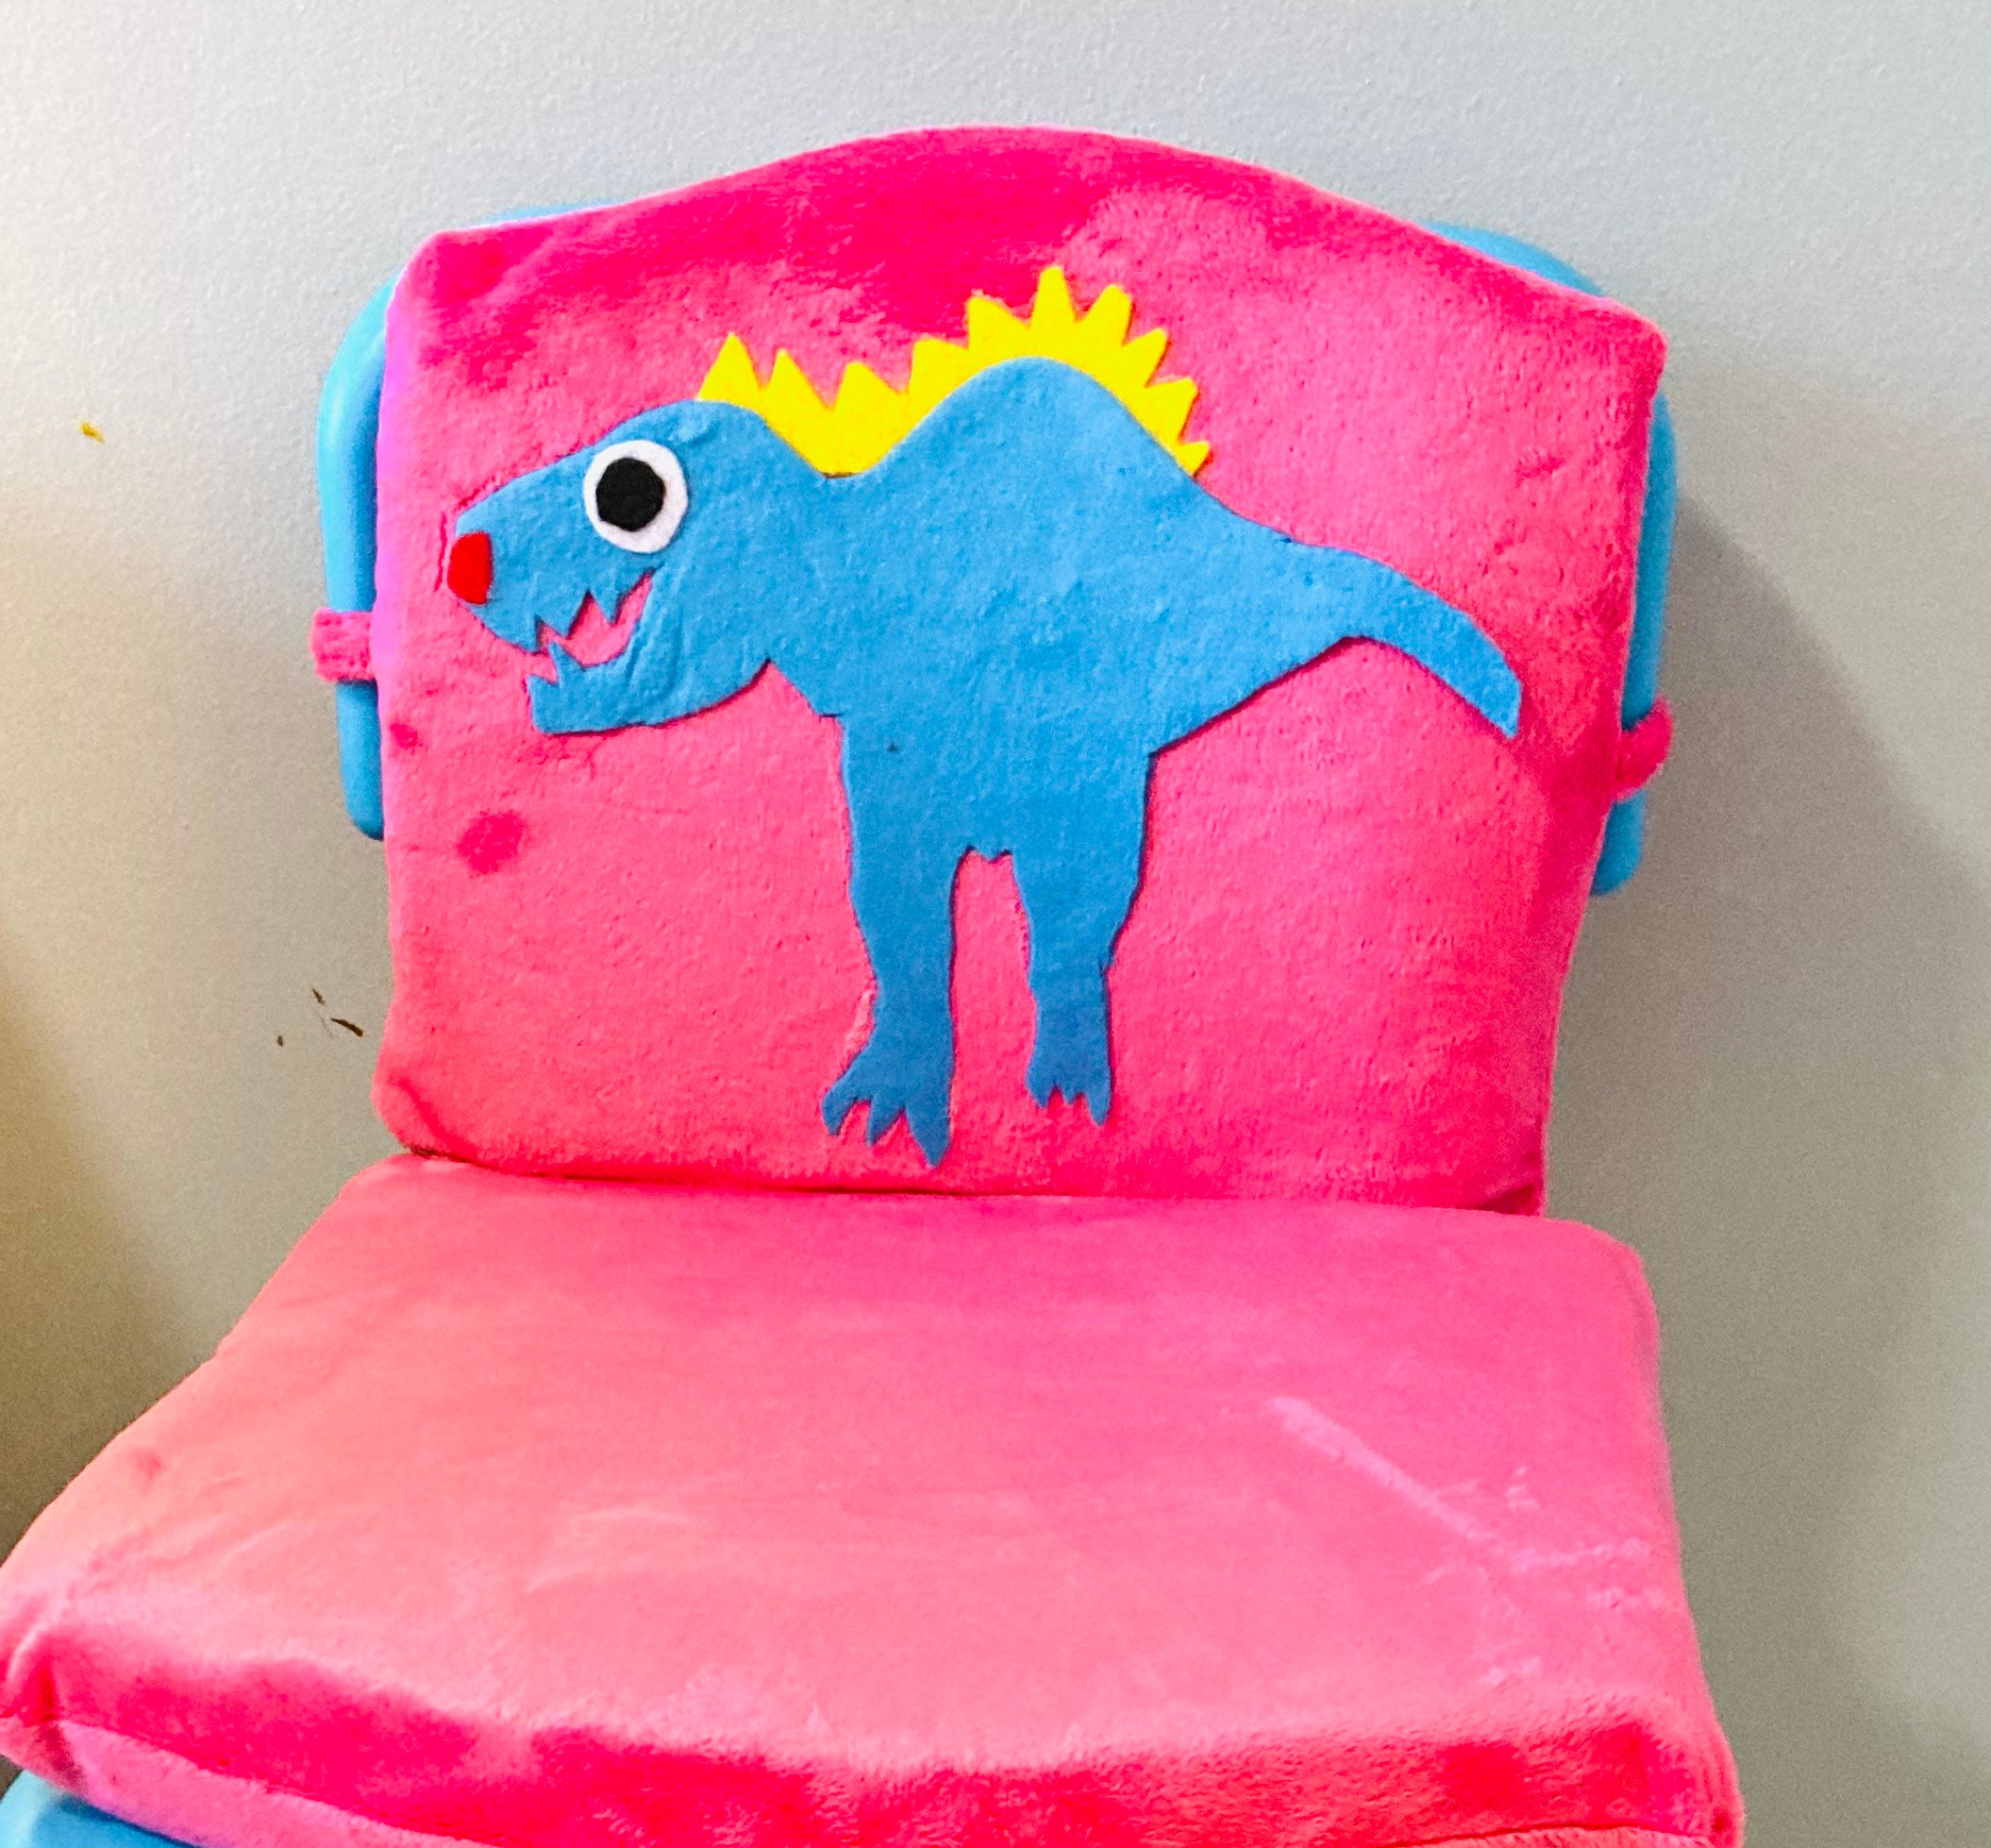 Booster Seat Pads, Minky Soft Chair Cushion With Ties, Child Dinosaur  Booster Cushion School Chair, Kids Chair Pad, Computer Chair Cushions 